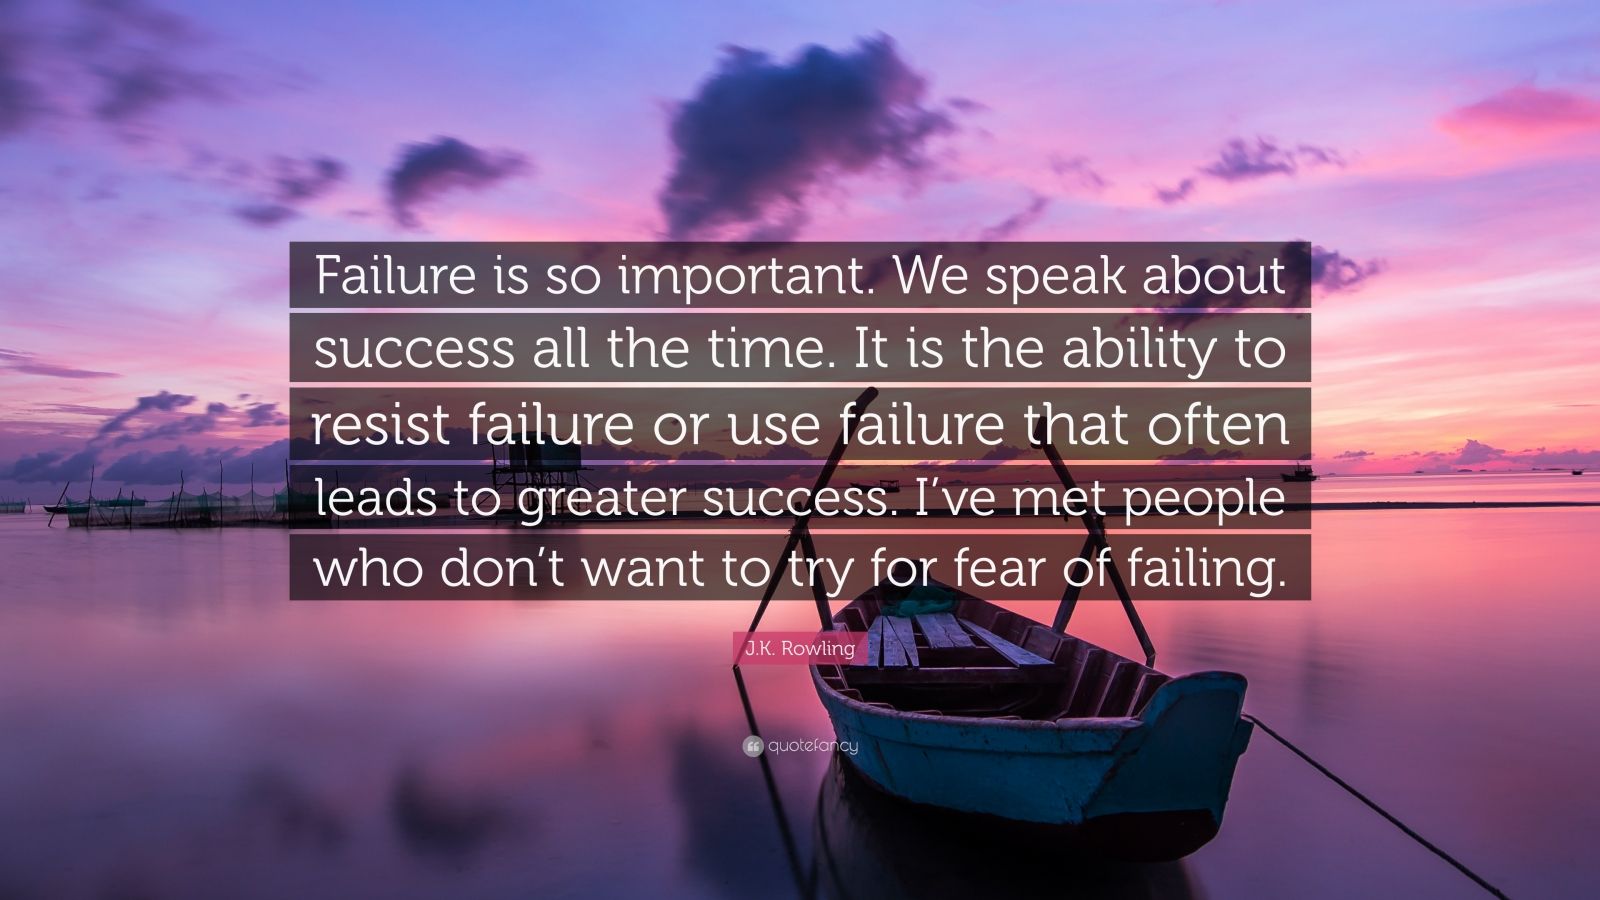 J.K. Rowling Quote: “Failure is so important. We speak about success ...